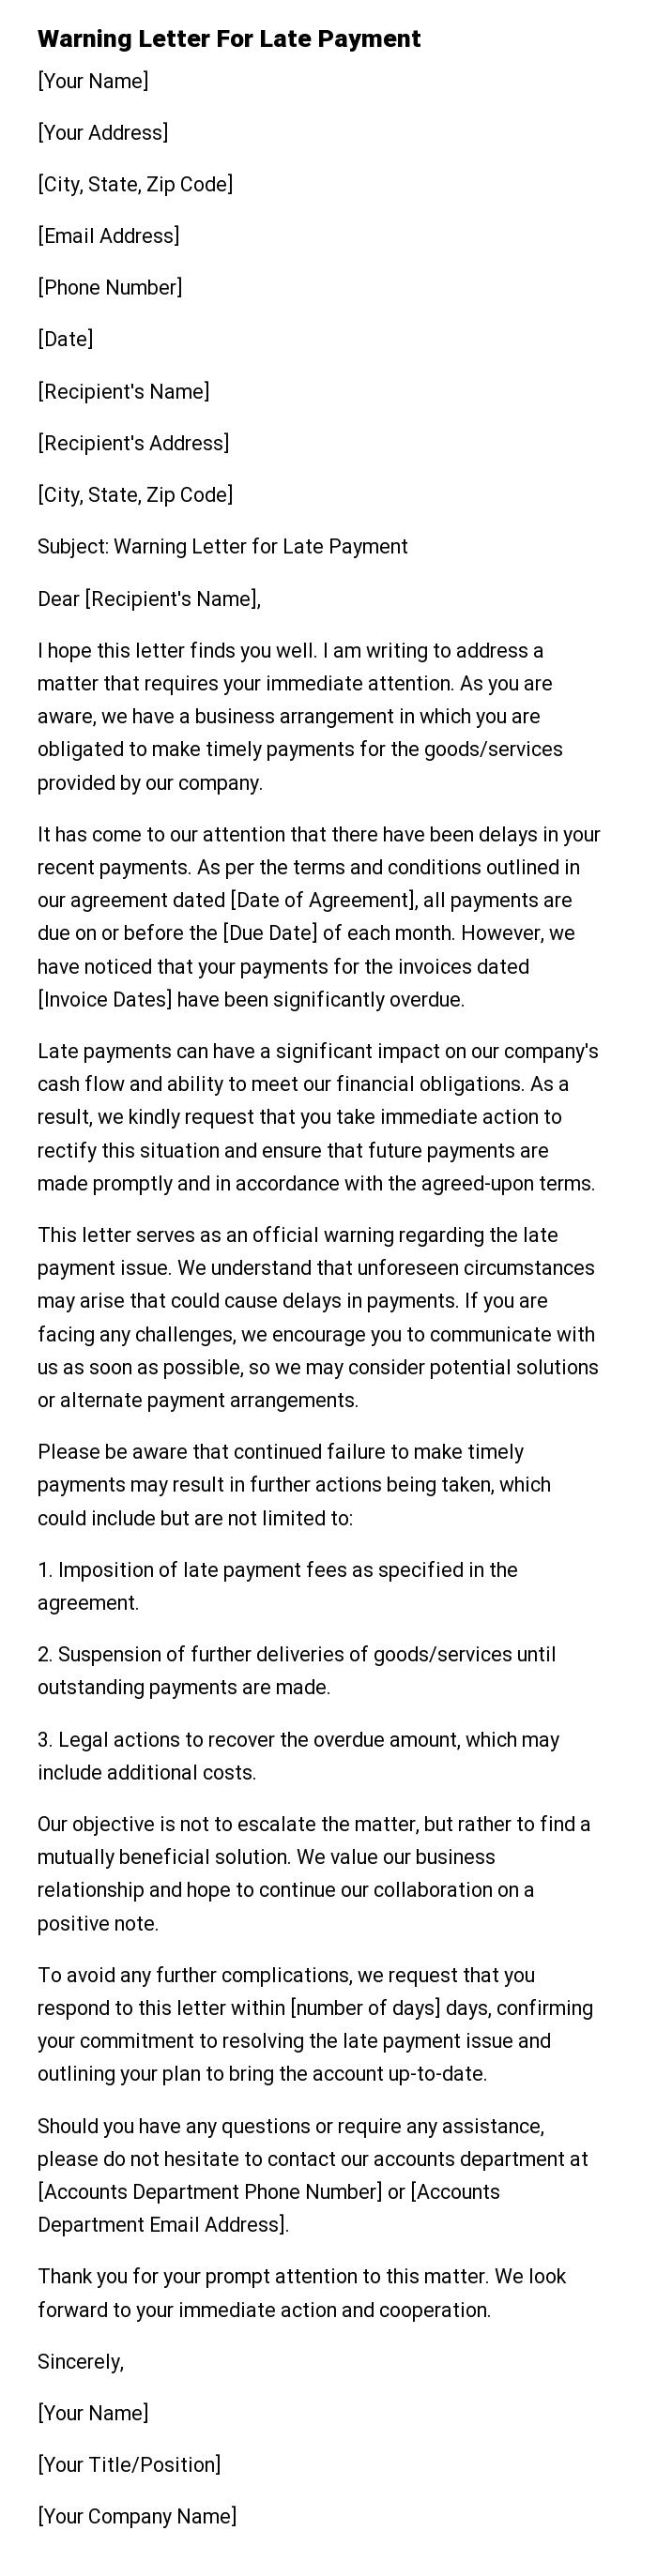 Warning Letter For Late Payment